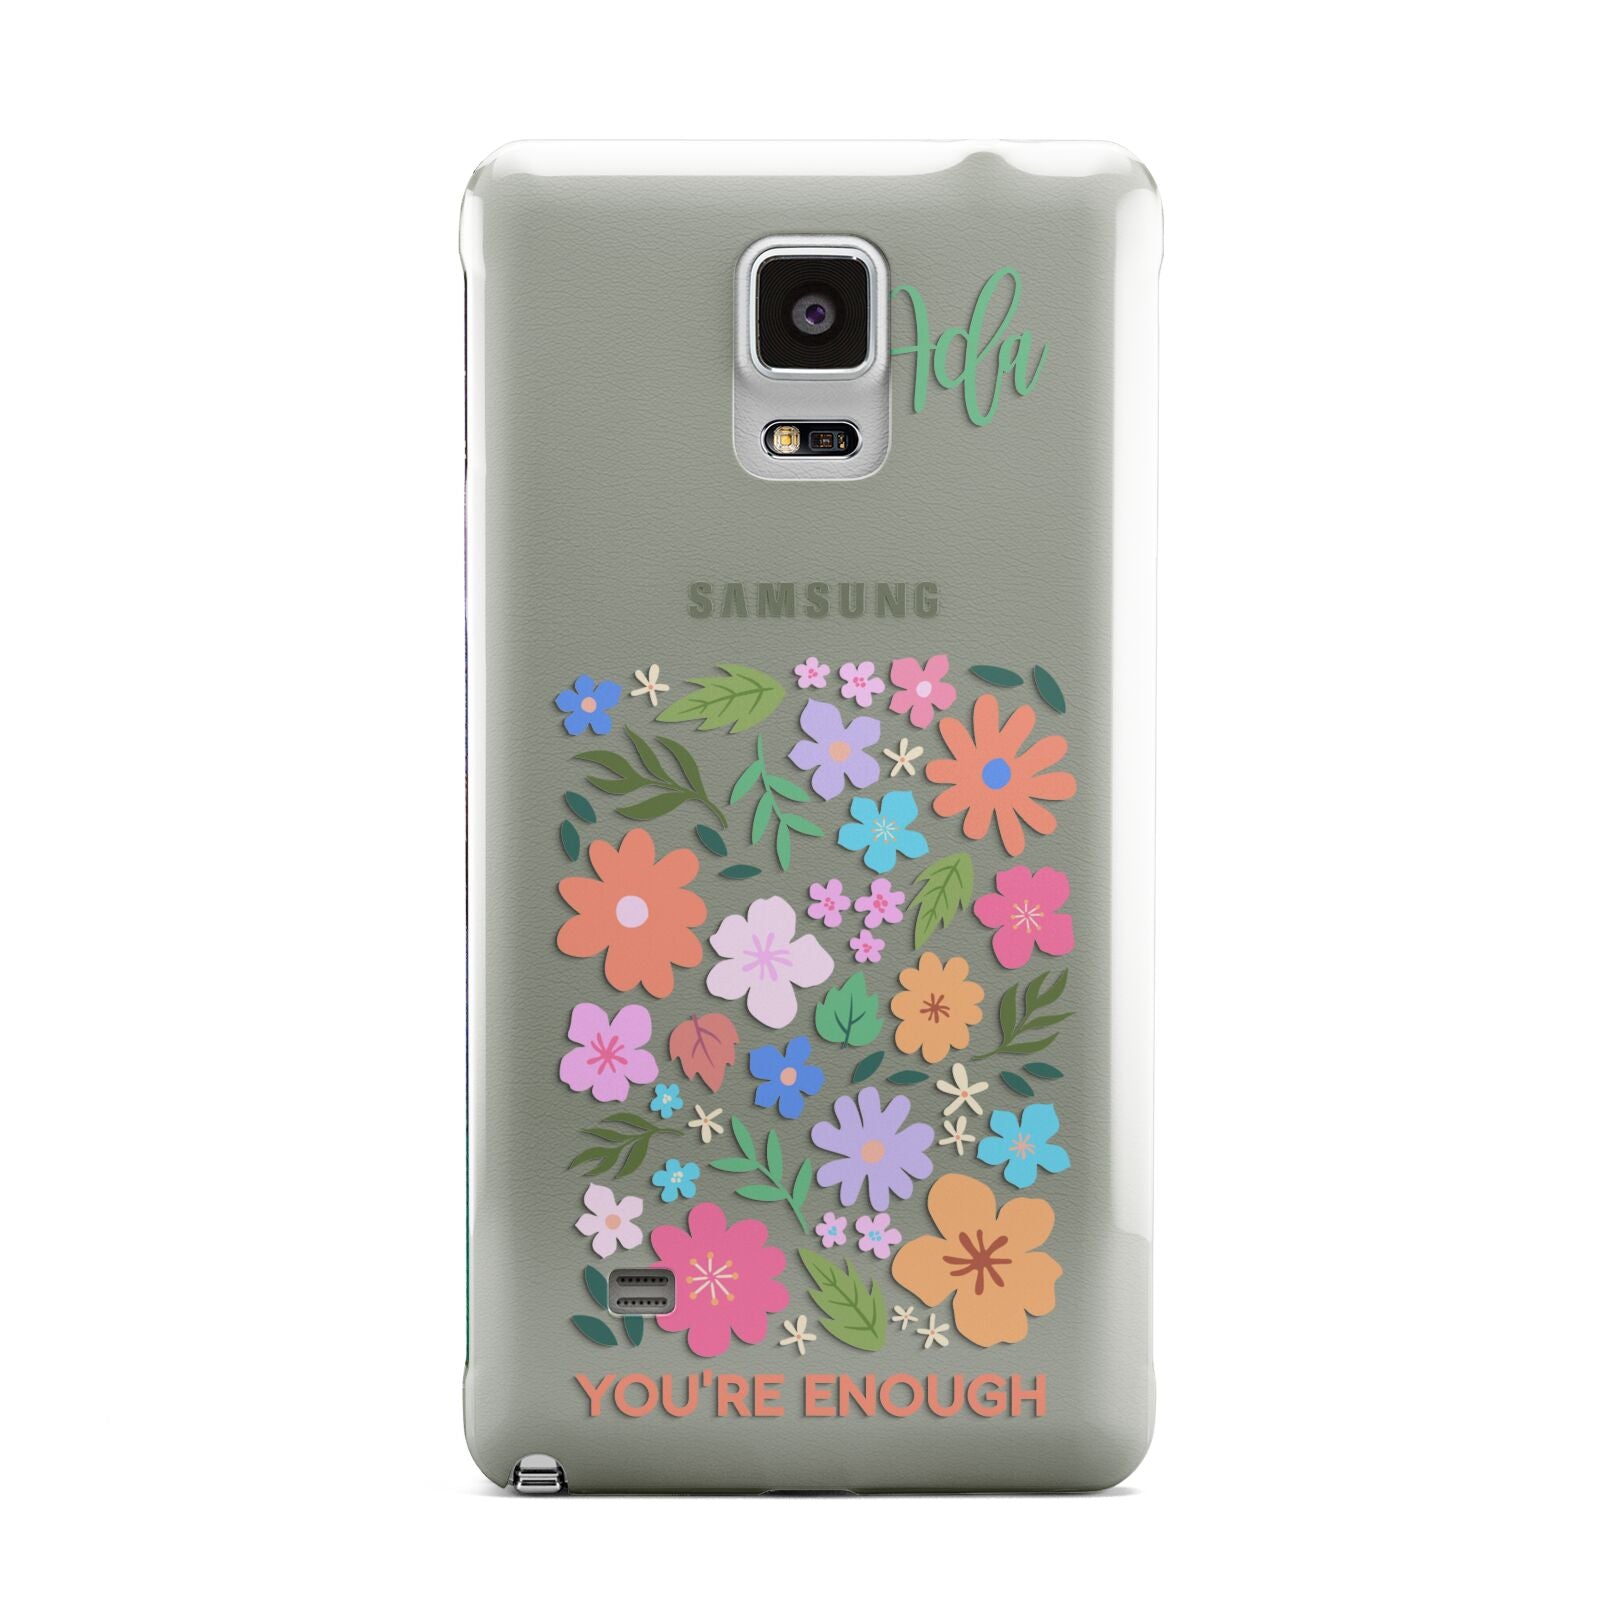 Floral Poster Samsung Galaxy Note 4 Case